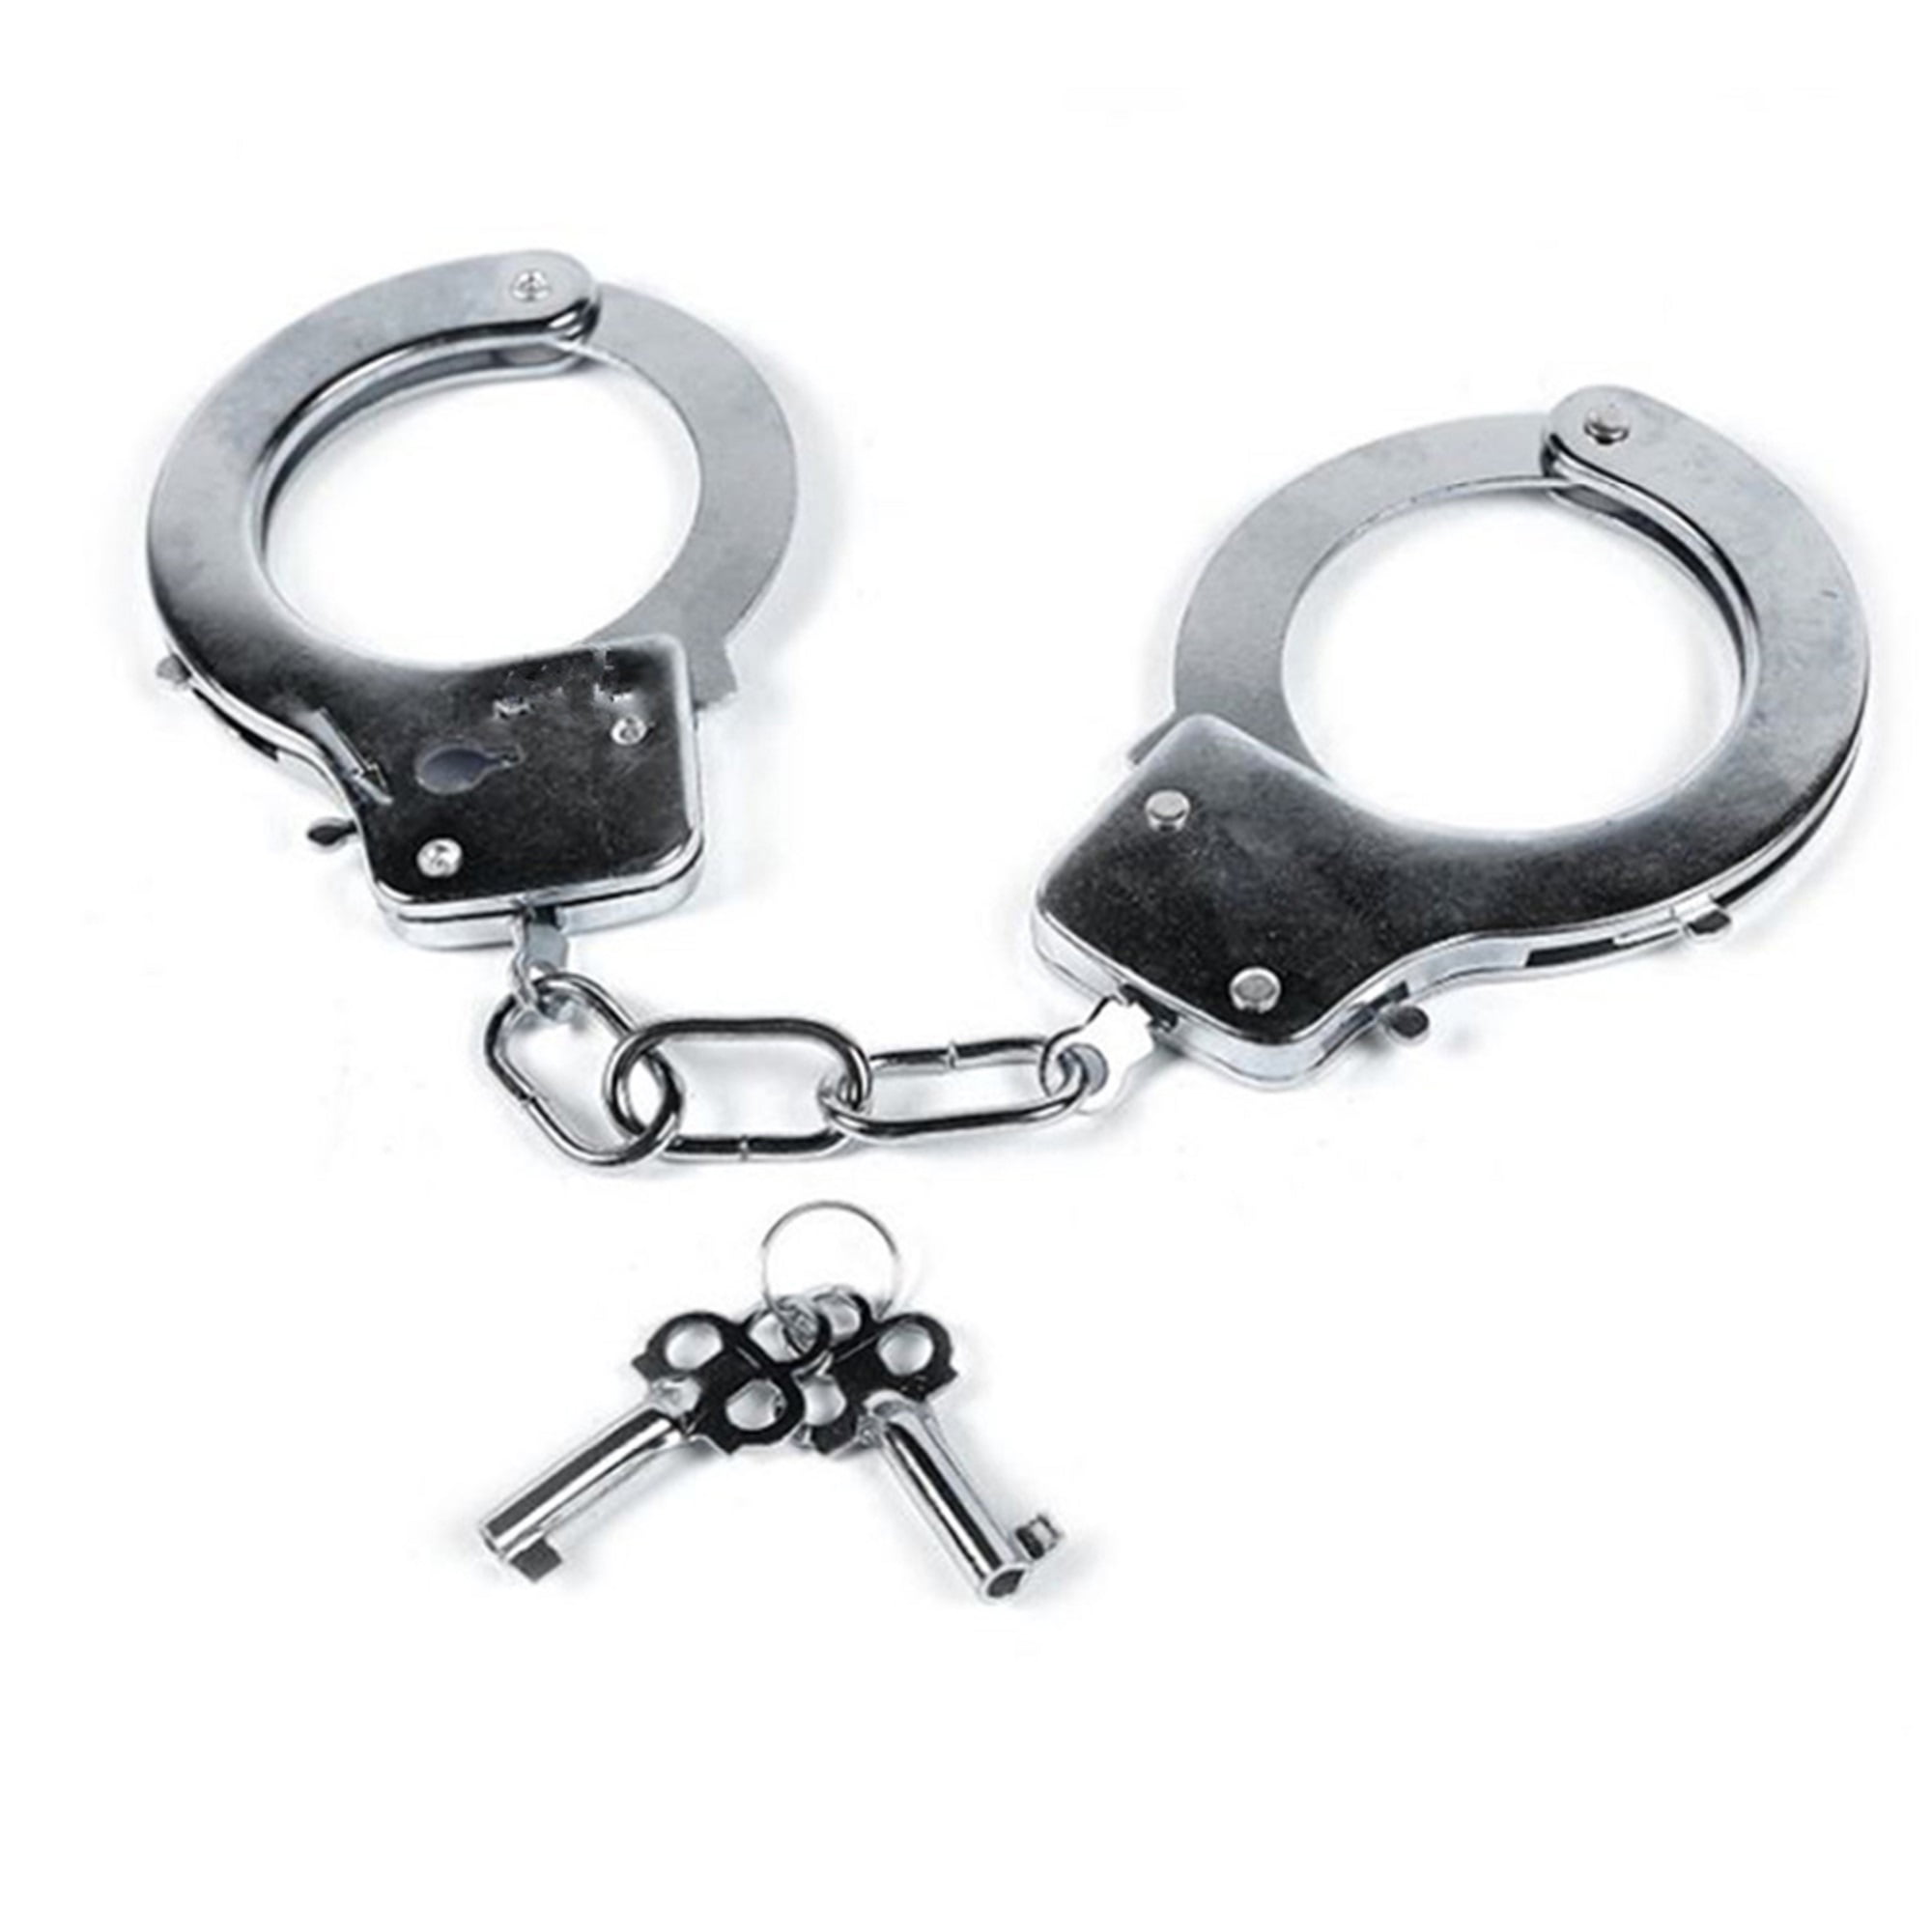 3 PAIR OF TOY METAL HANDCUFFS WITH KEYS KIDS HANDCUFF COSTUME ACCESSORY 